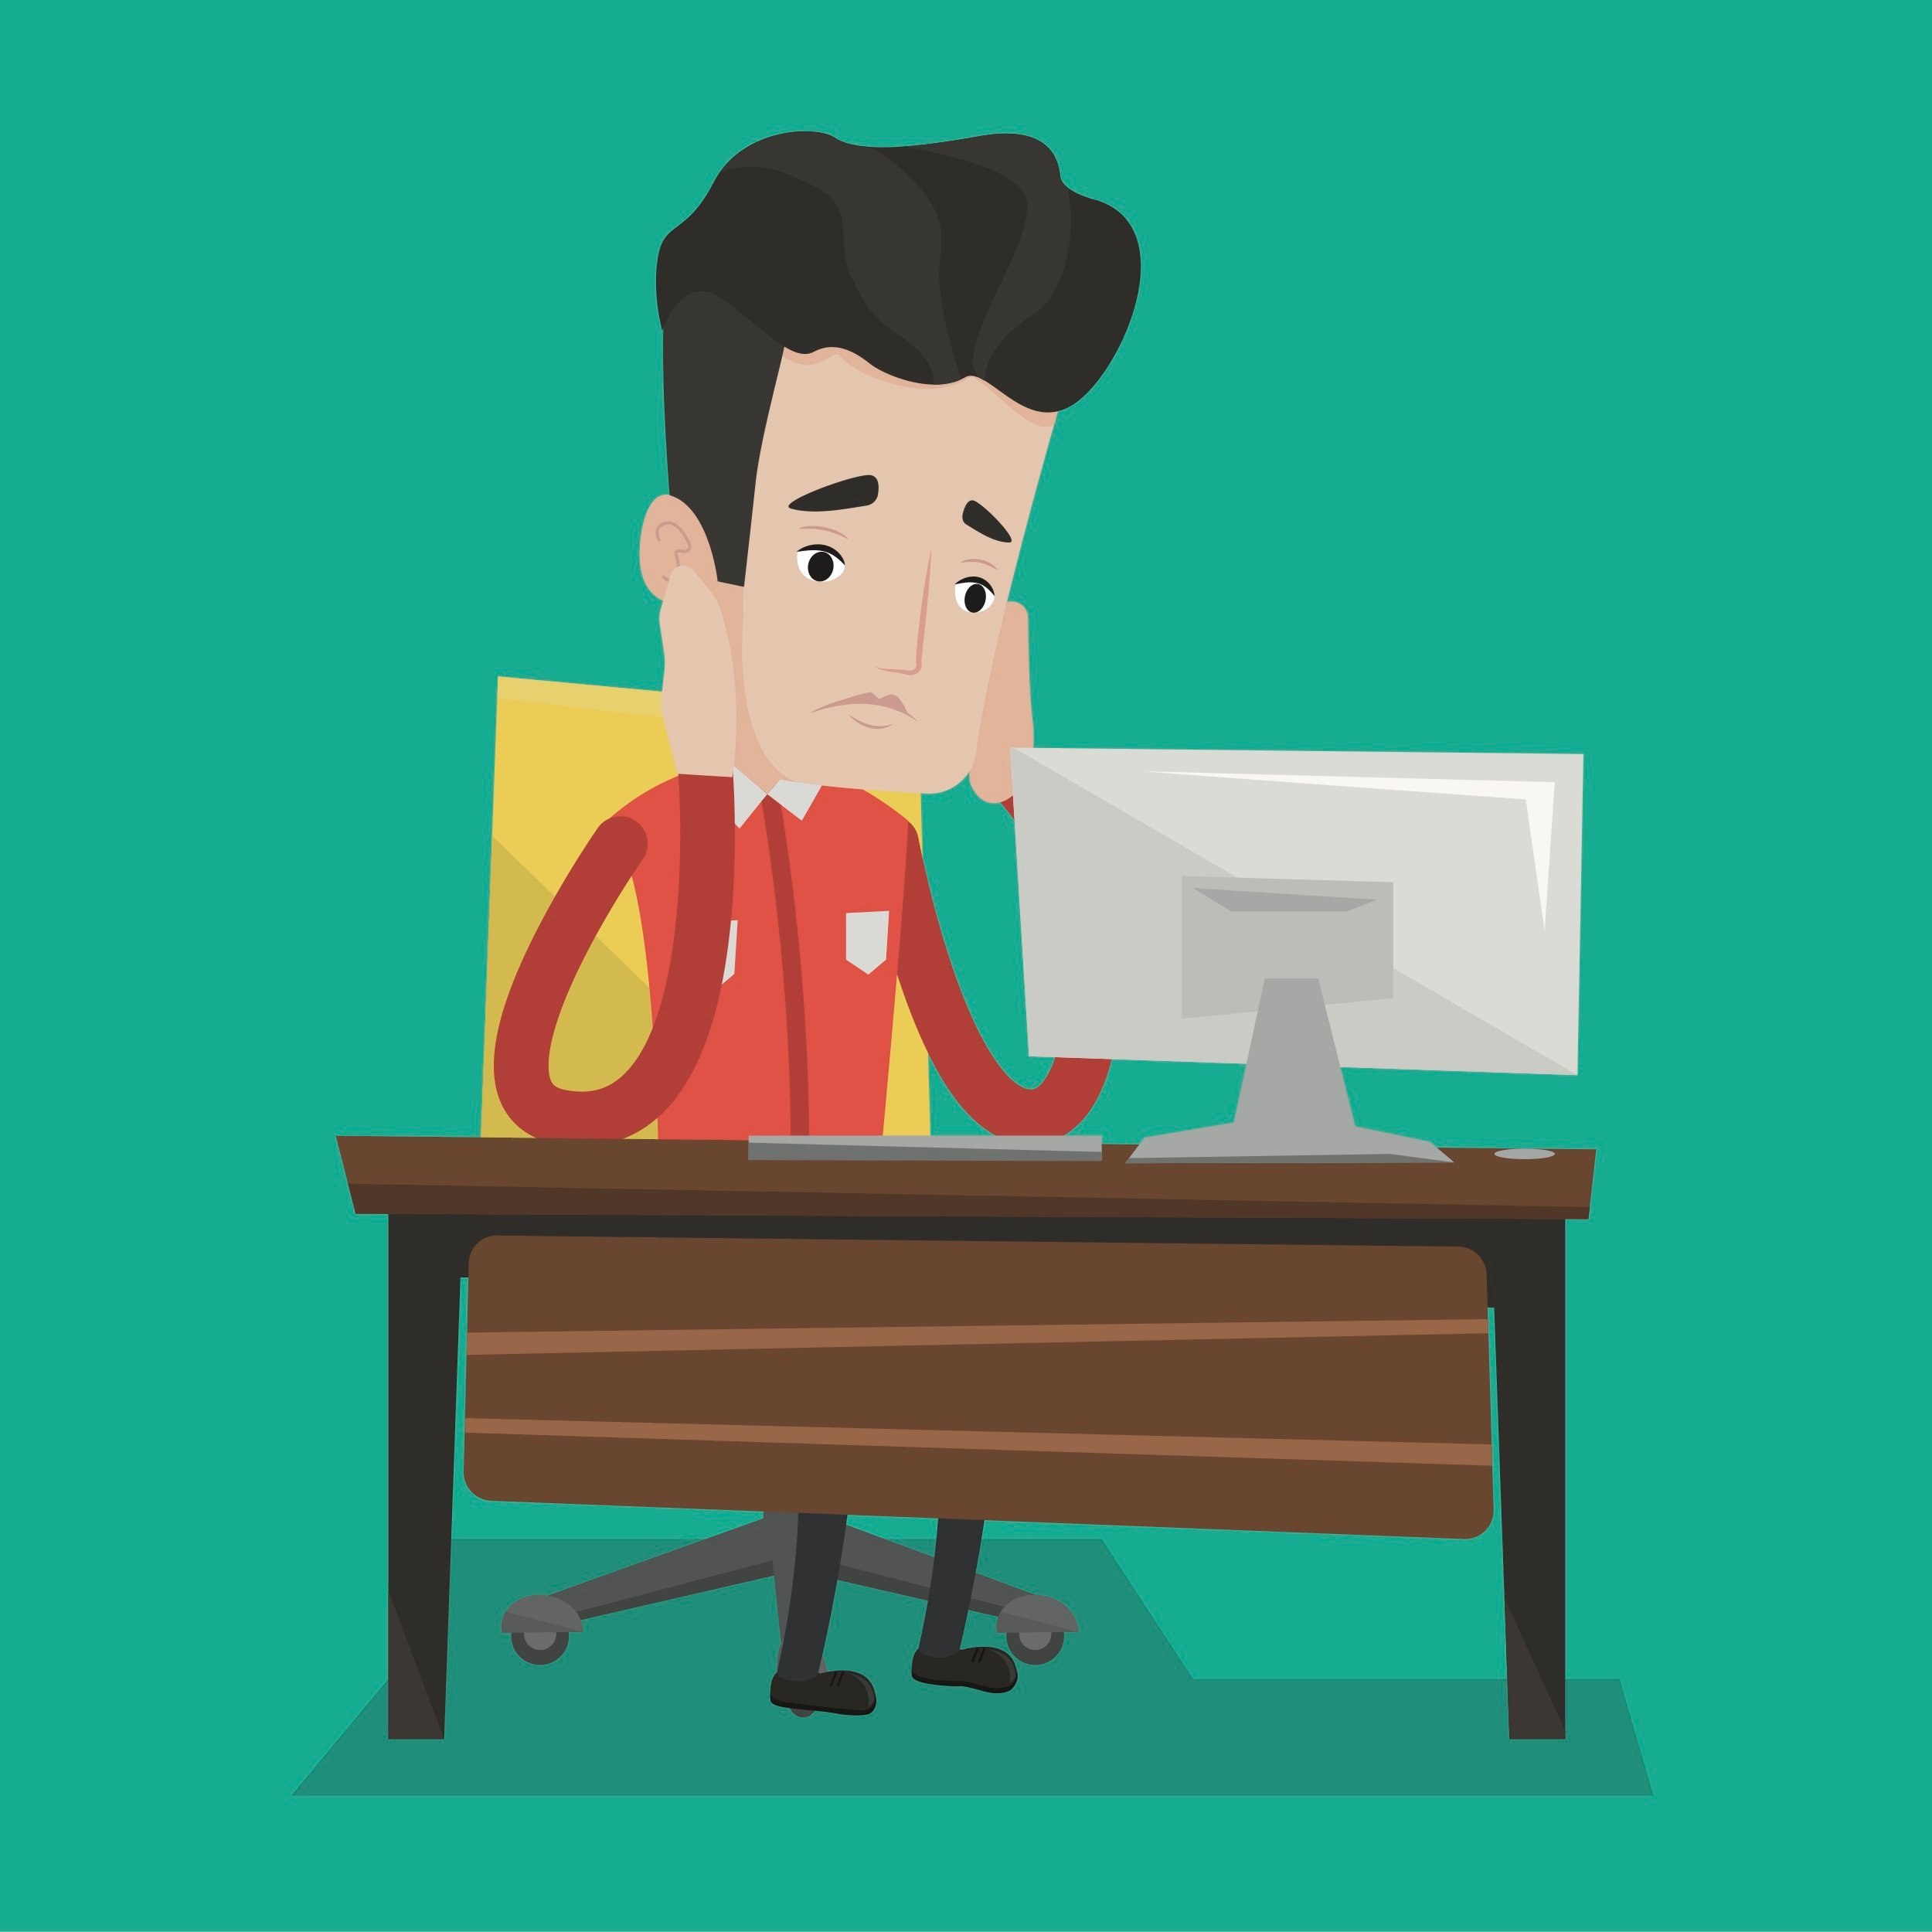 graphicstock-exhausted-caucasian-businessman-sitting-at-workplace-in-front-of-computer-in-office-overworked-tired-employee-working-with-his-head-propped-on-hand-vector-flat-design-illustration-square-layout_SXNSNCD8Ib